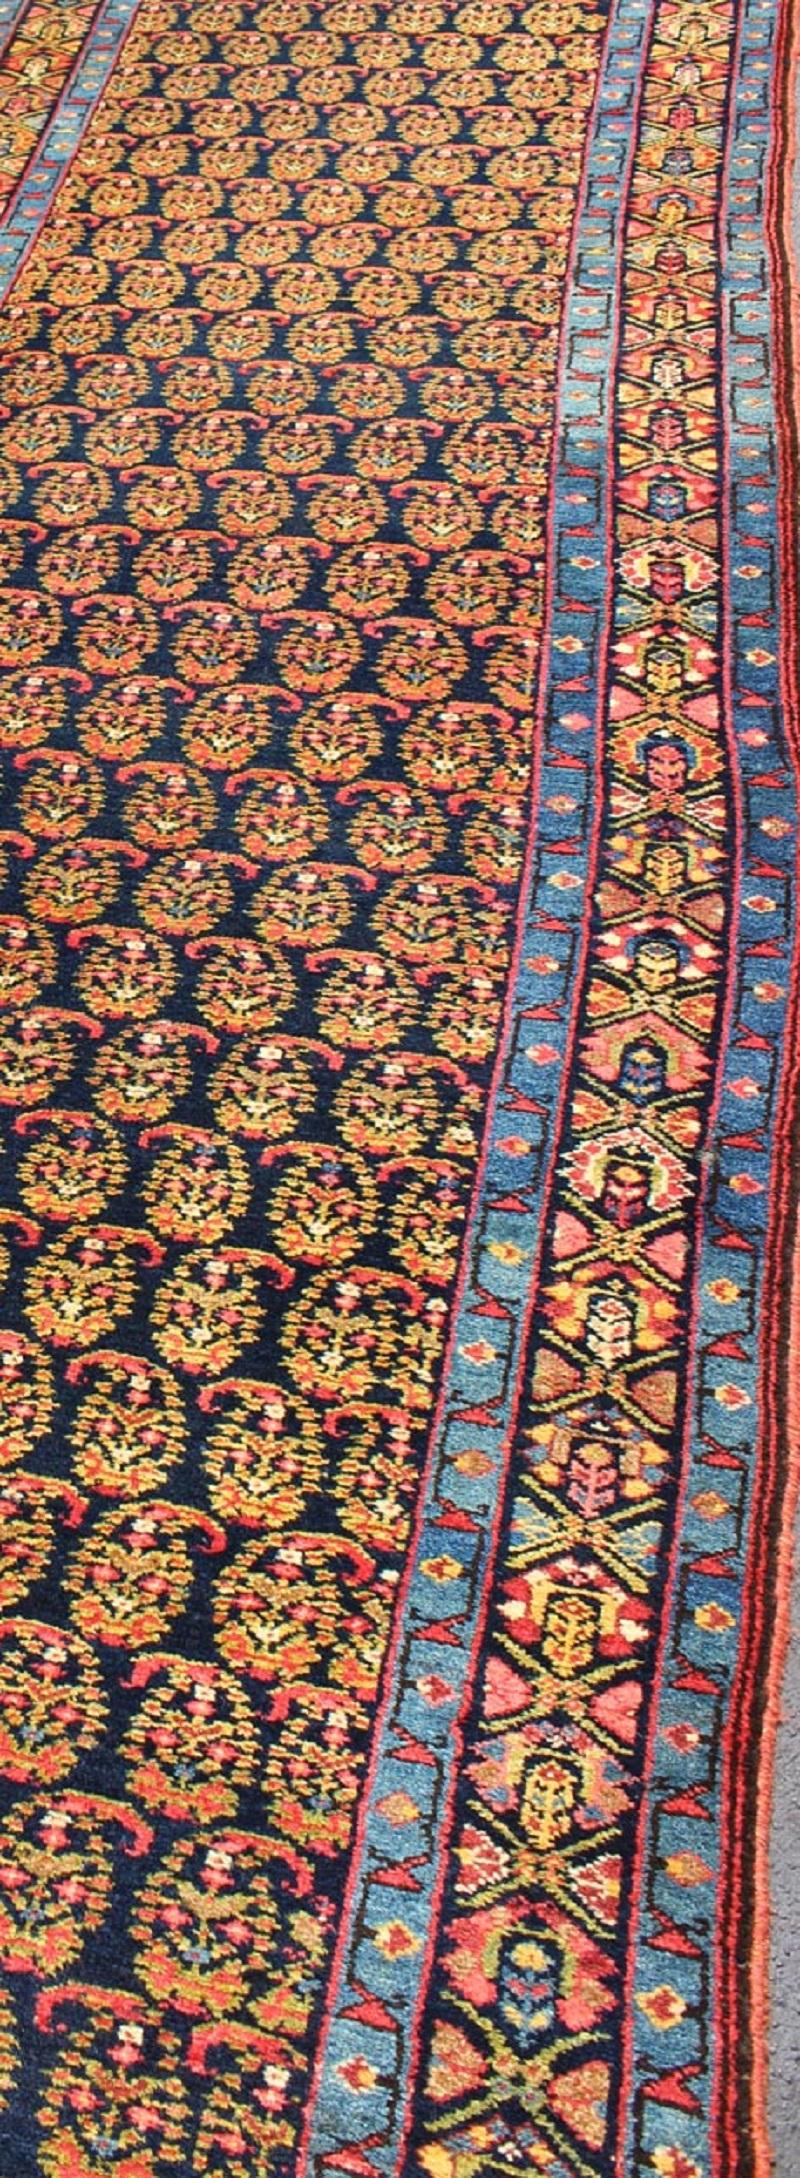 Colorful Antique Persian Malayer Runner with Palmettes in Blue, Orange and Red For Sale 3